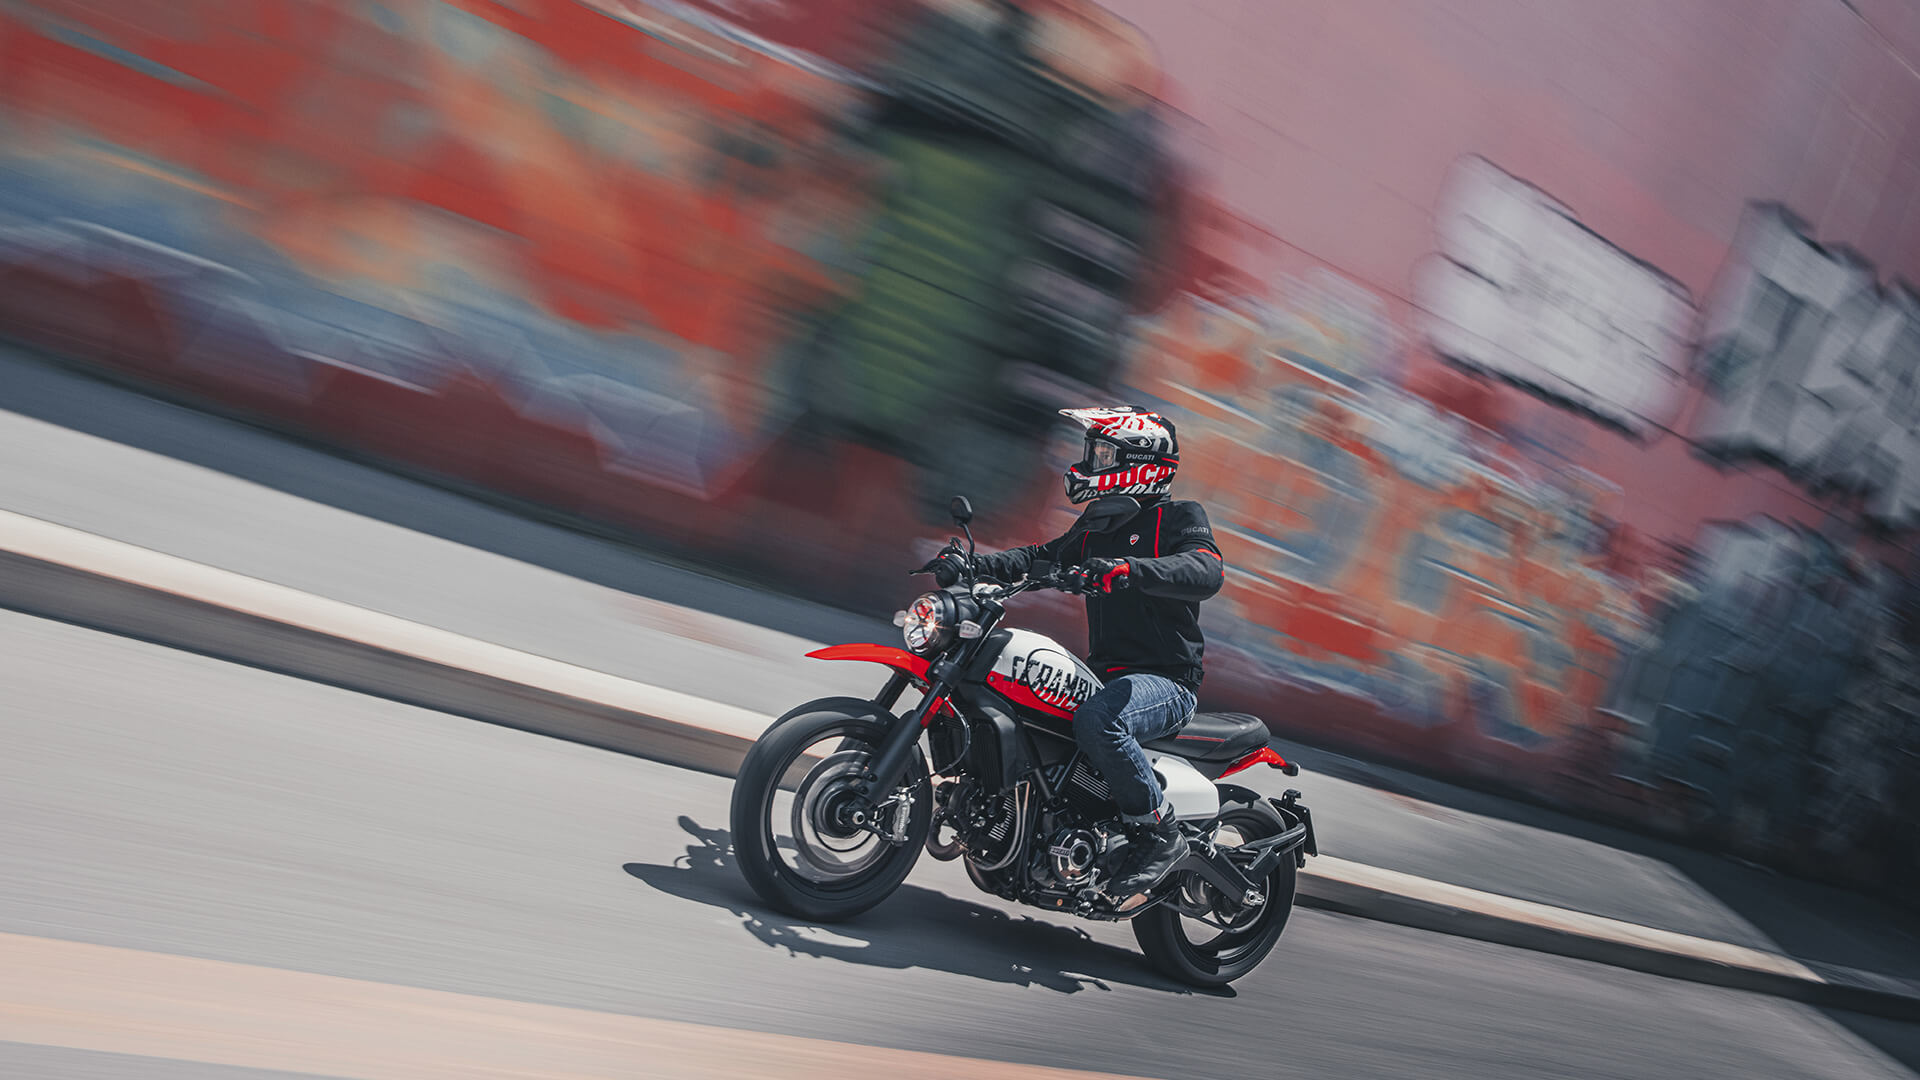 A side view of a model trying out the new Scrambler Ducati Urban Motorcycle courtesy of Ducati's World Premiere